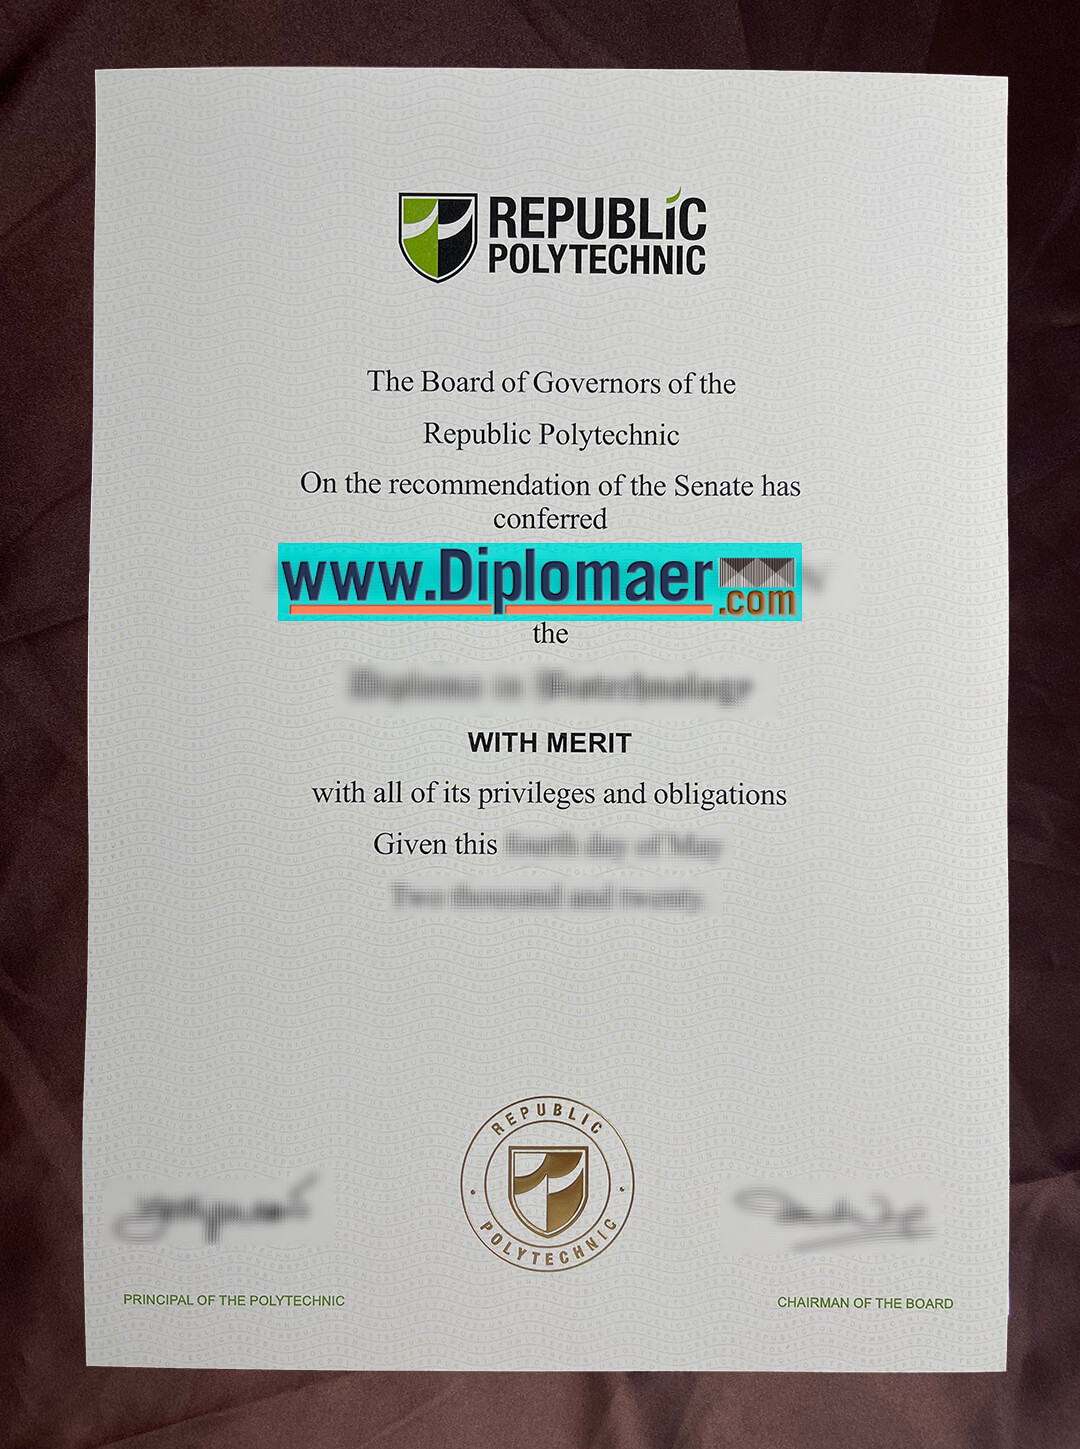 Repubic Polytechnic fake diploma - How much does it cost to buy a Republic Polytechnic fake diploma online?